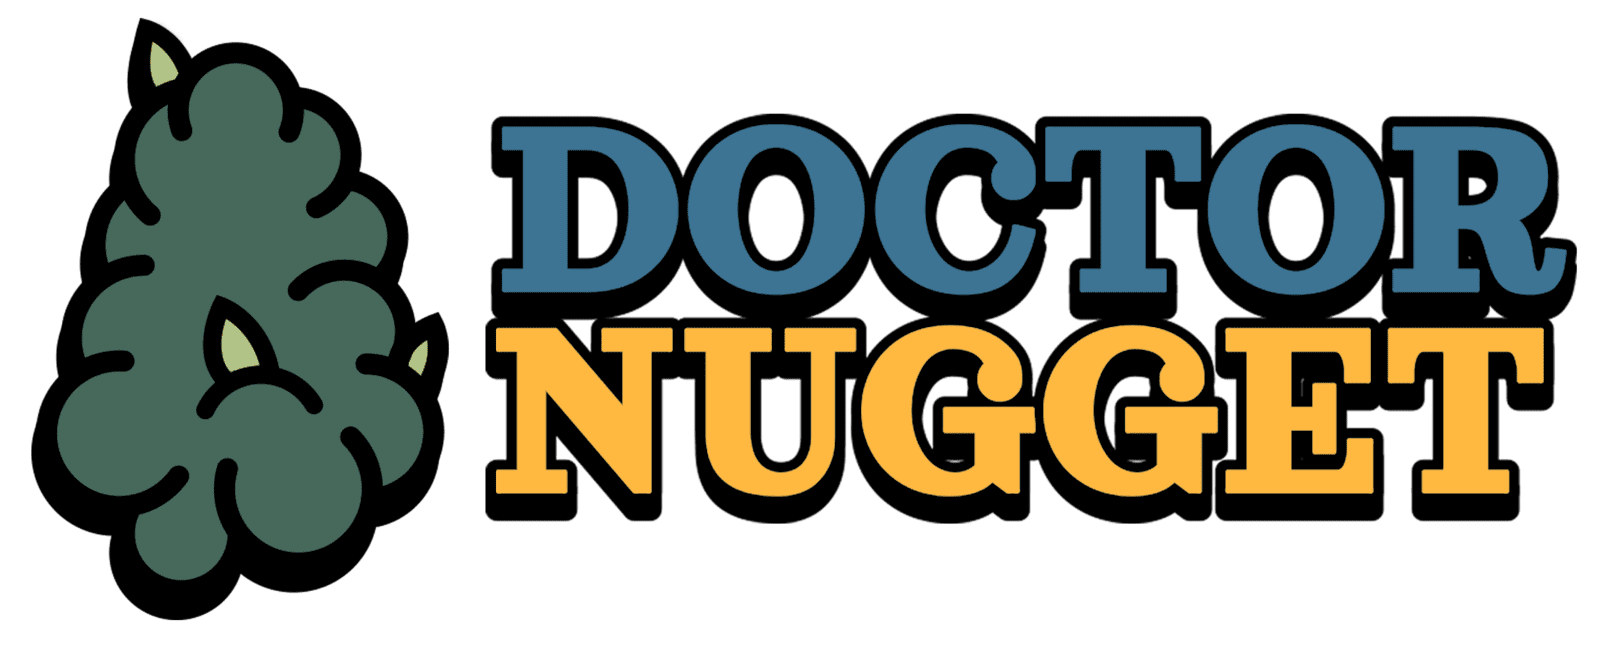 Dr. Nugget